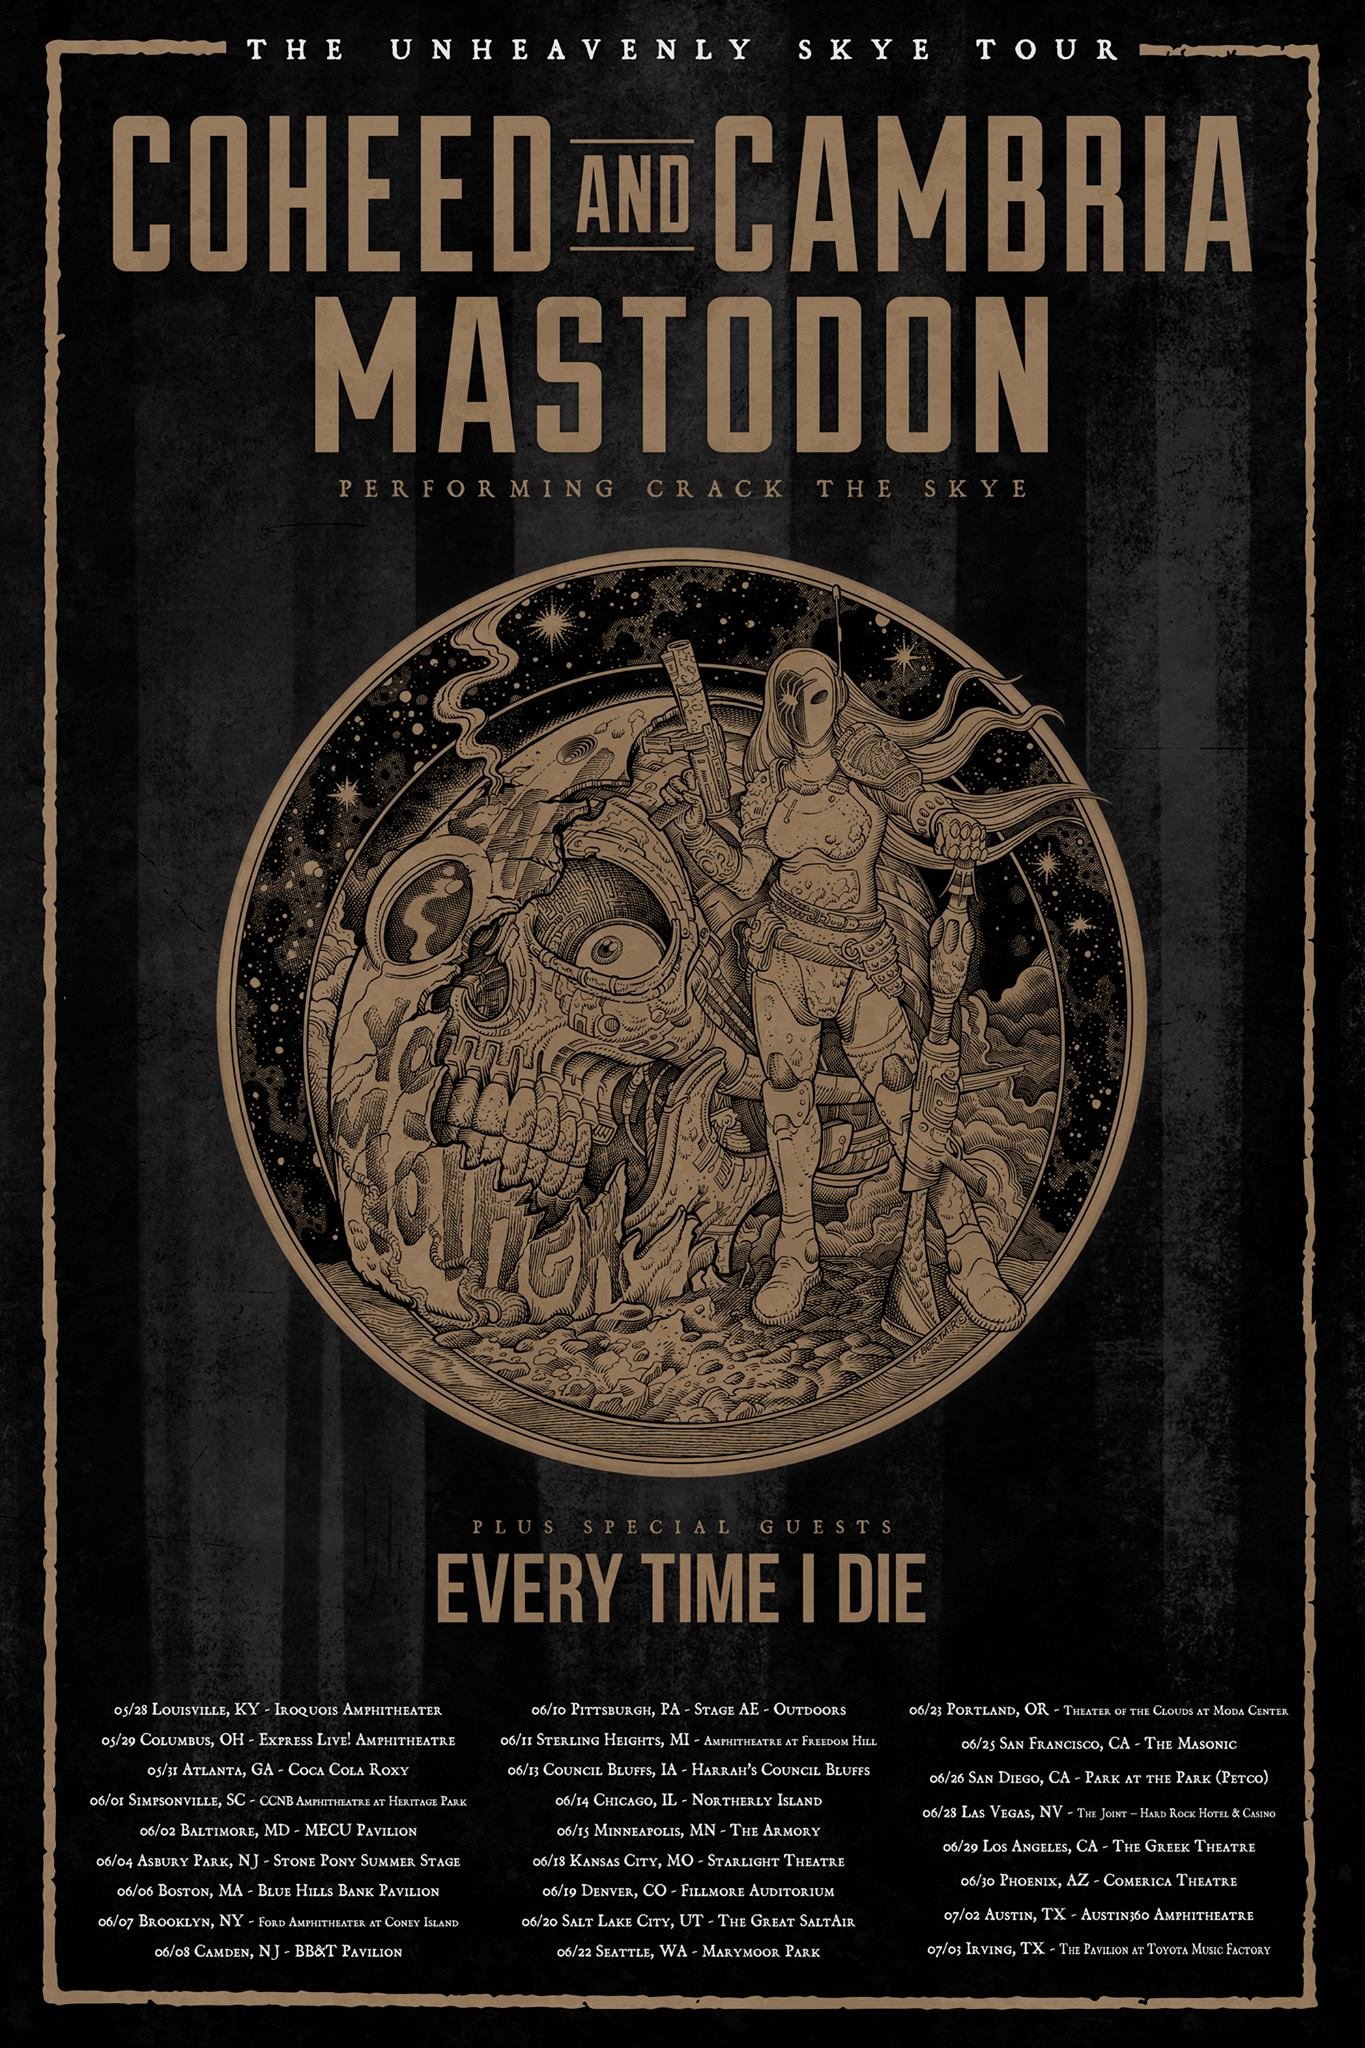 Mastodon to Play US Tour with Coheed and Cambria This Summer